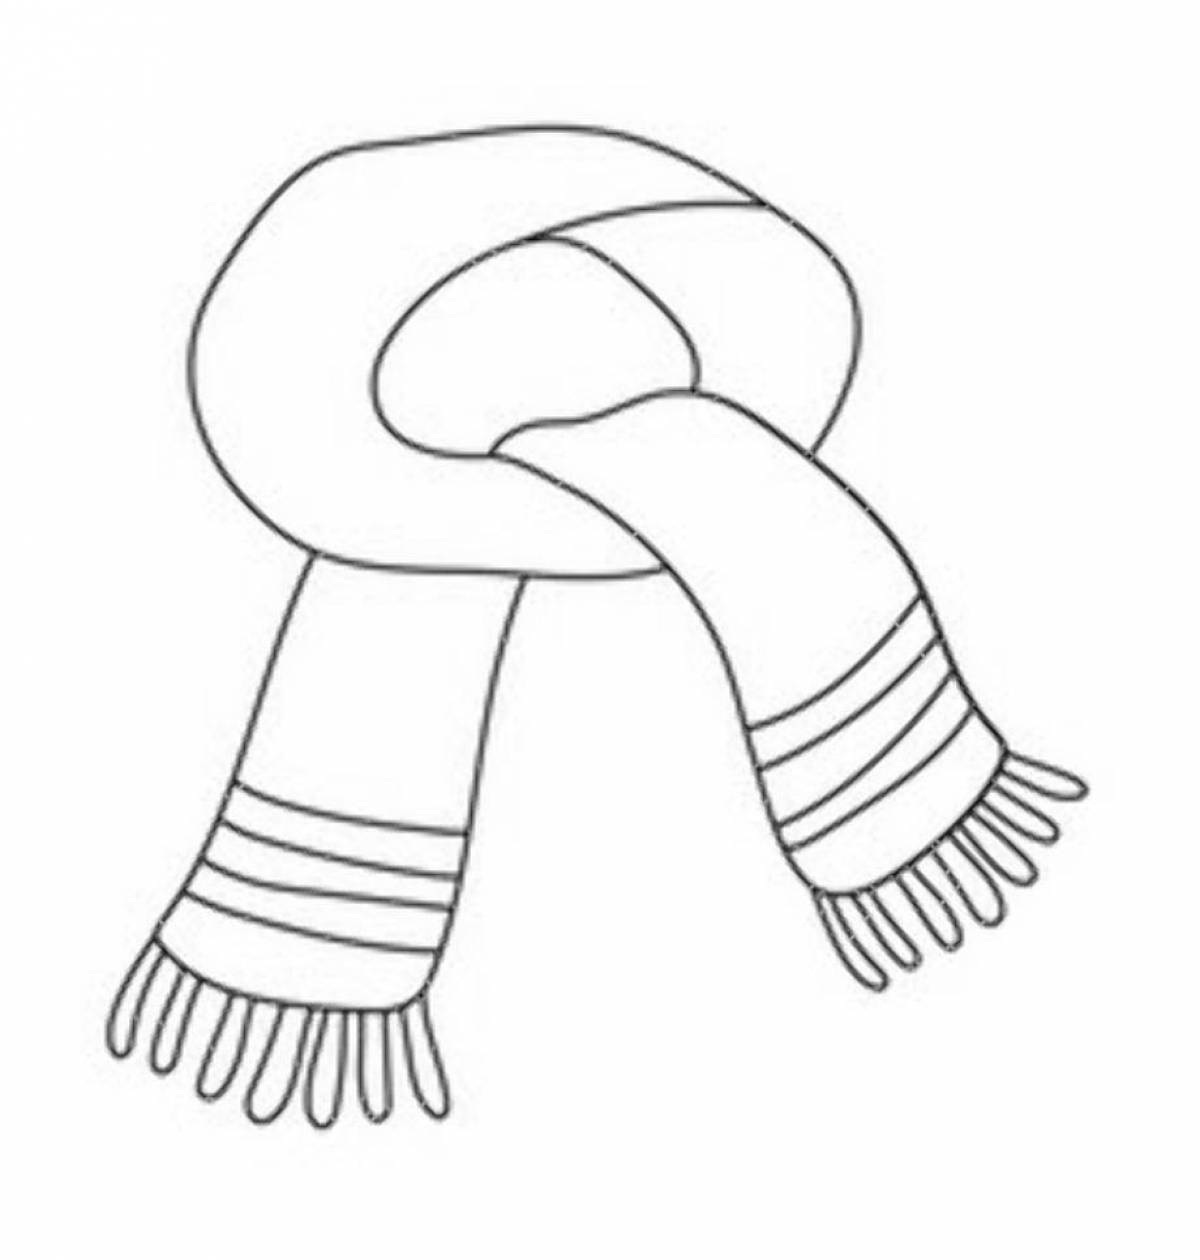 Animated scarf coloring page